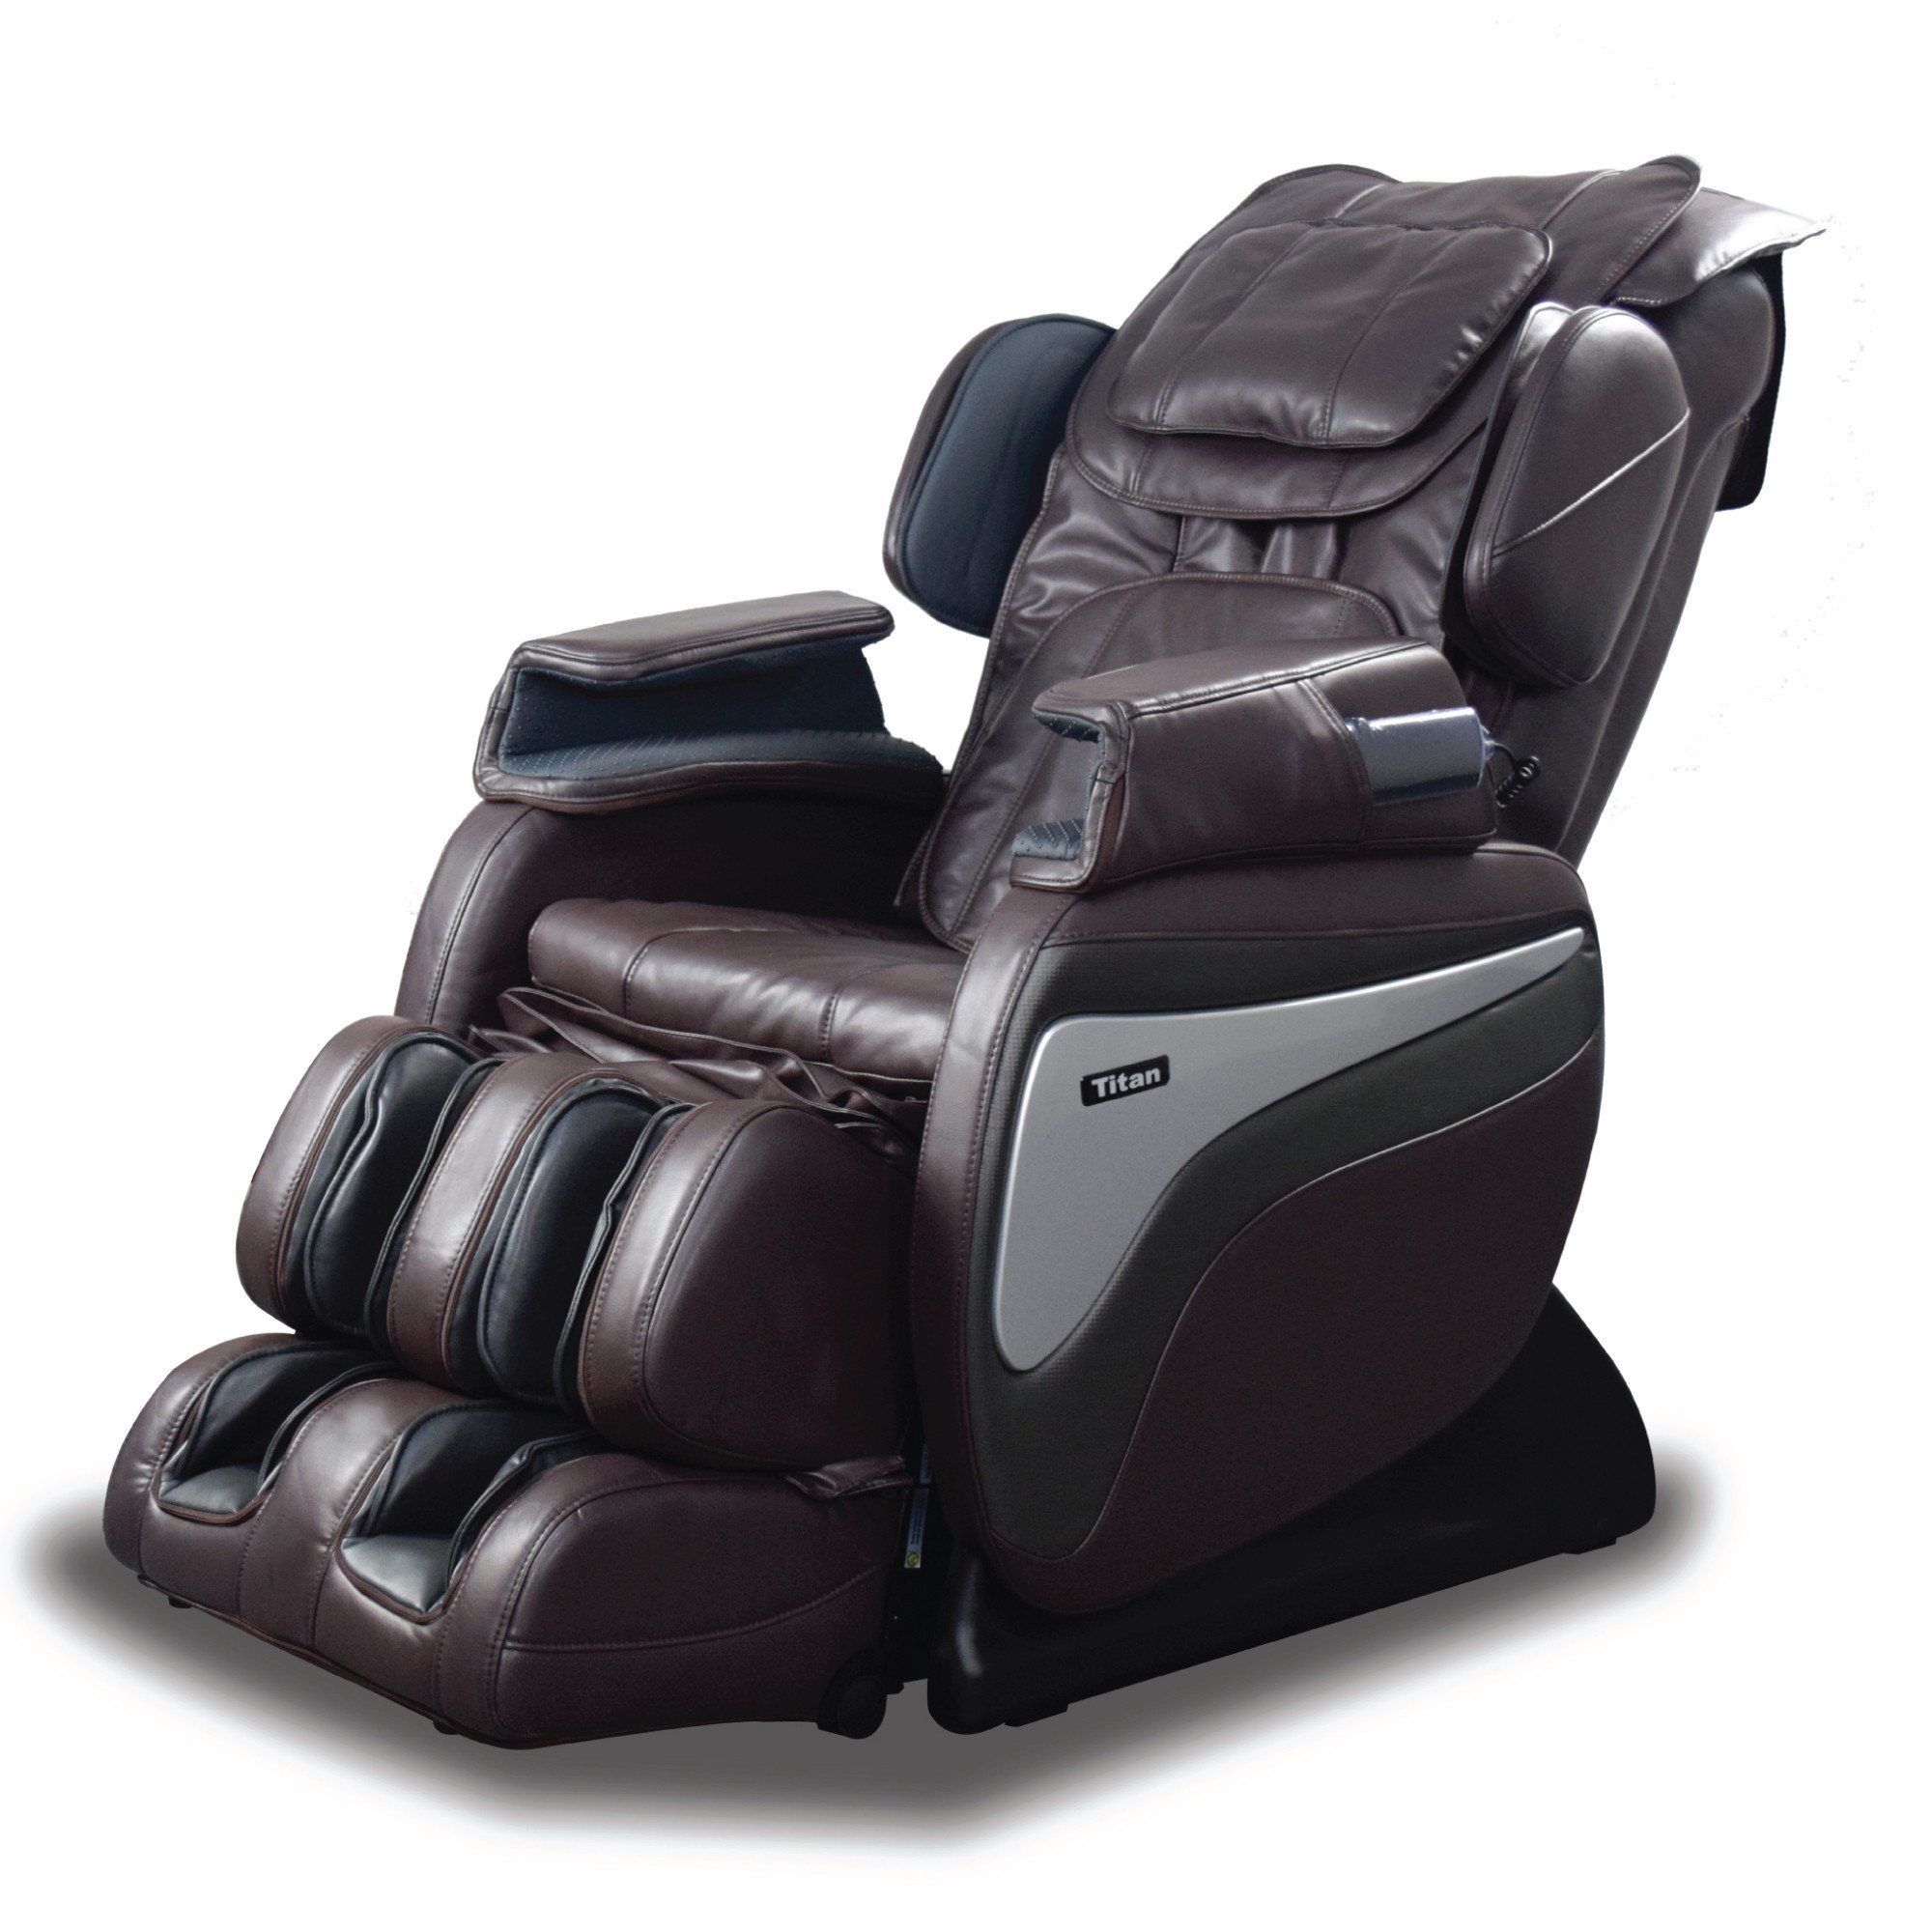 Titan TI-8700 Massage Chair - Brown - Front Angle View